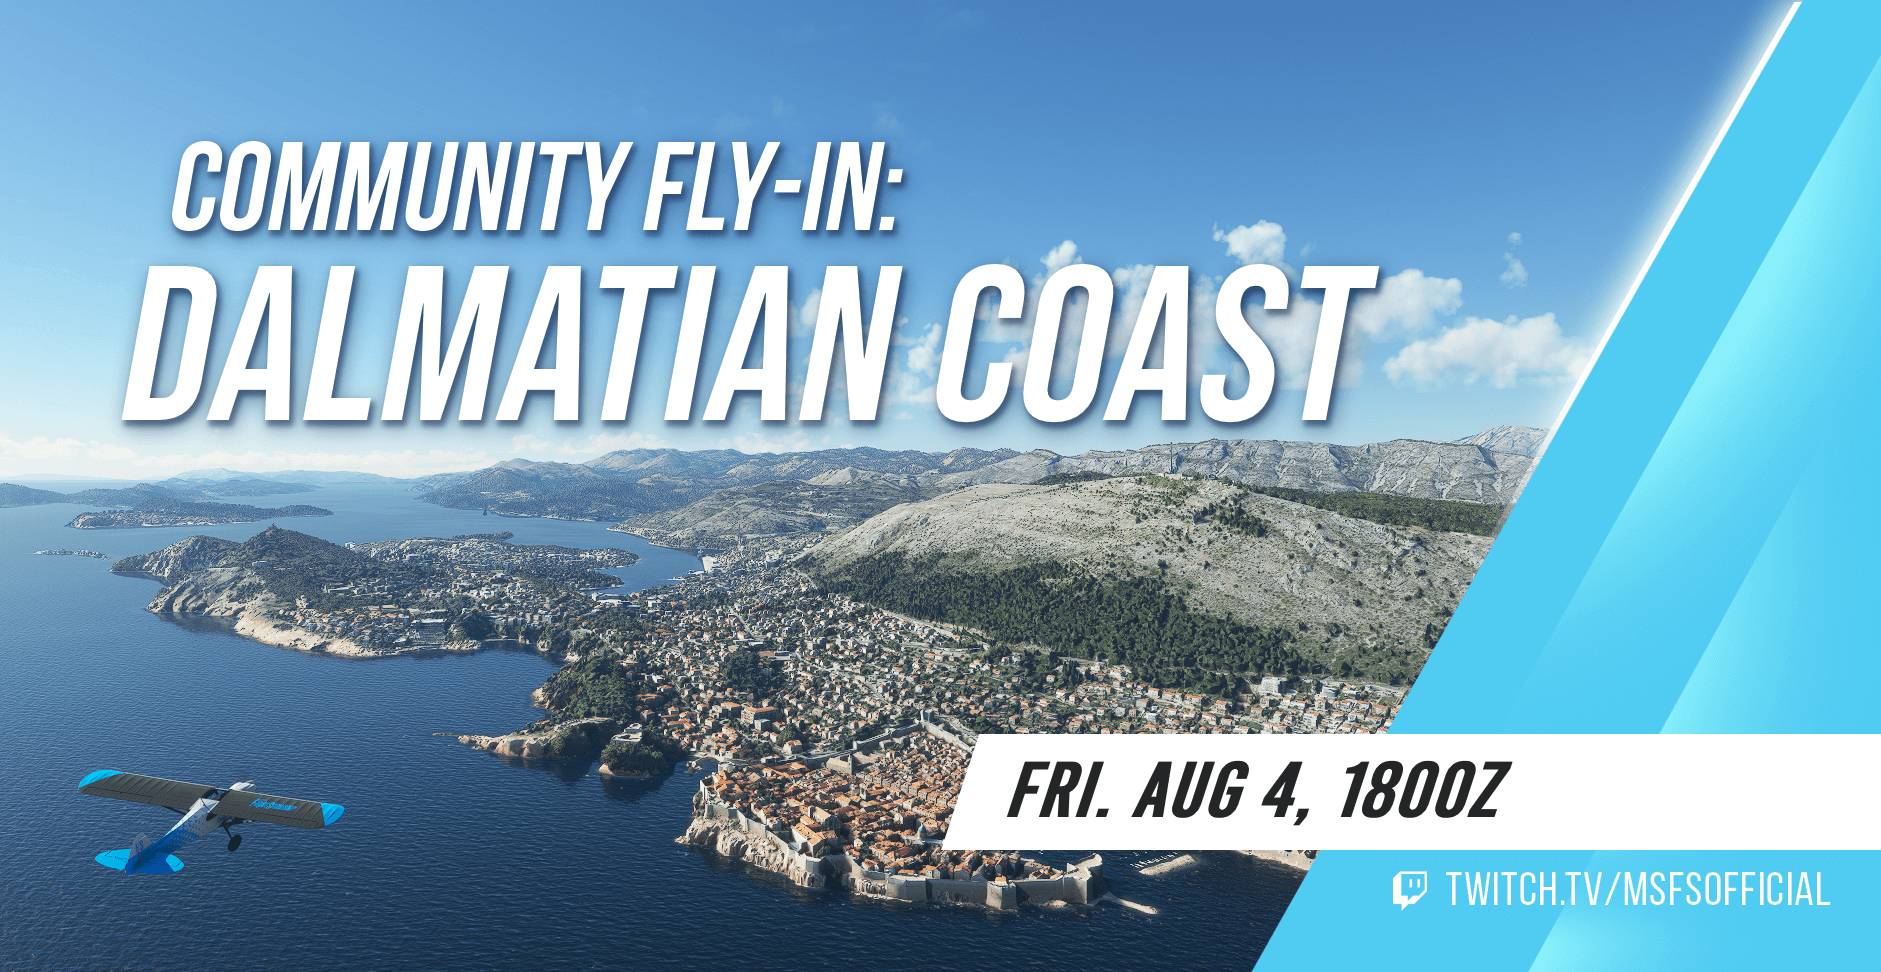 An aircraft flies above the city of Dubrovnik. Community Fly-In: Dalmatian Coast. Join us on Friday August 3 at 1800Z! You can watch at twitch.tv/msfsofficial